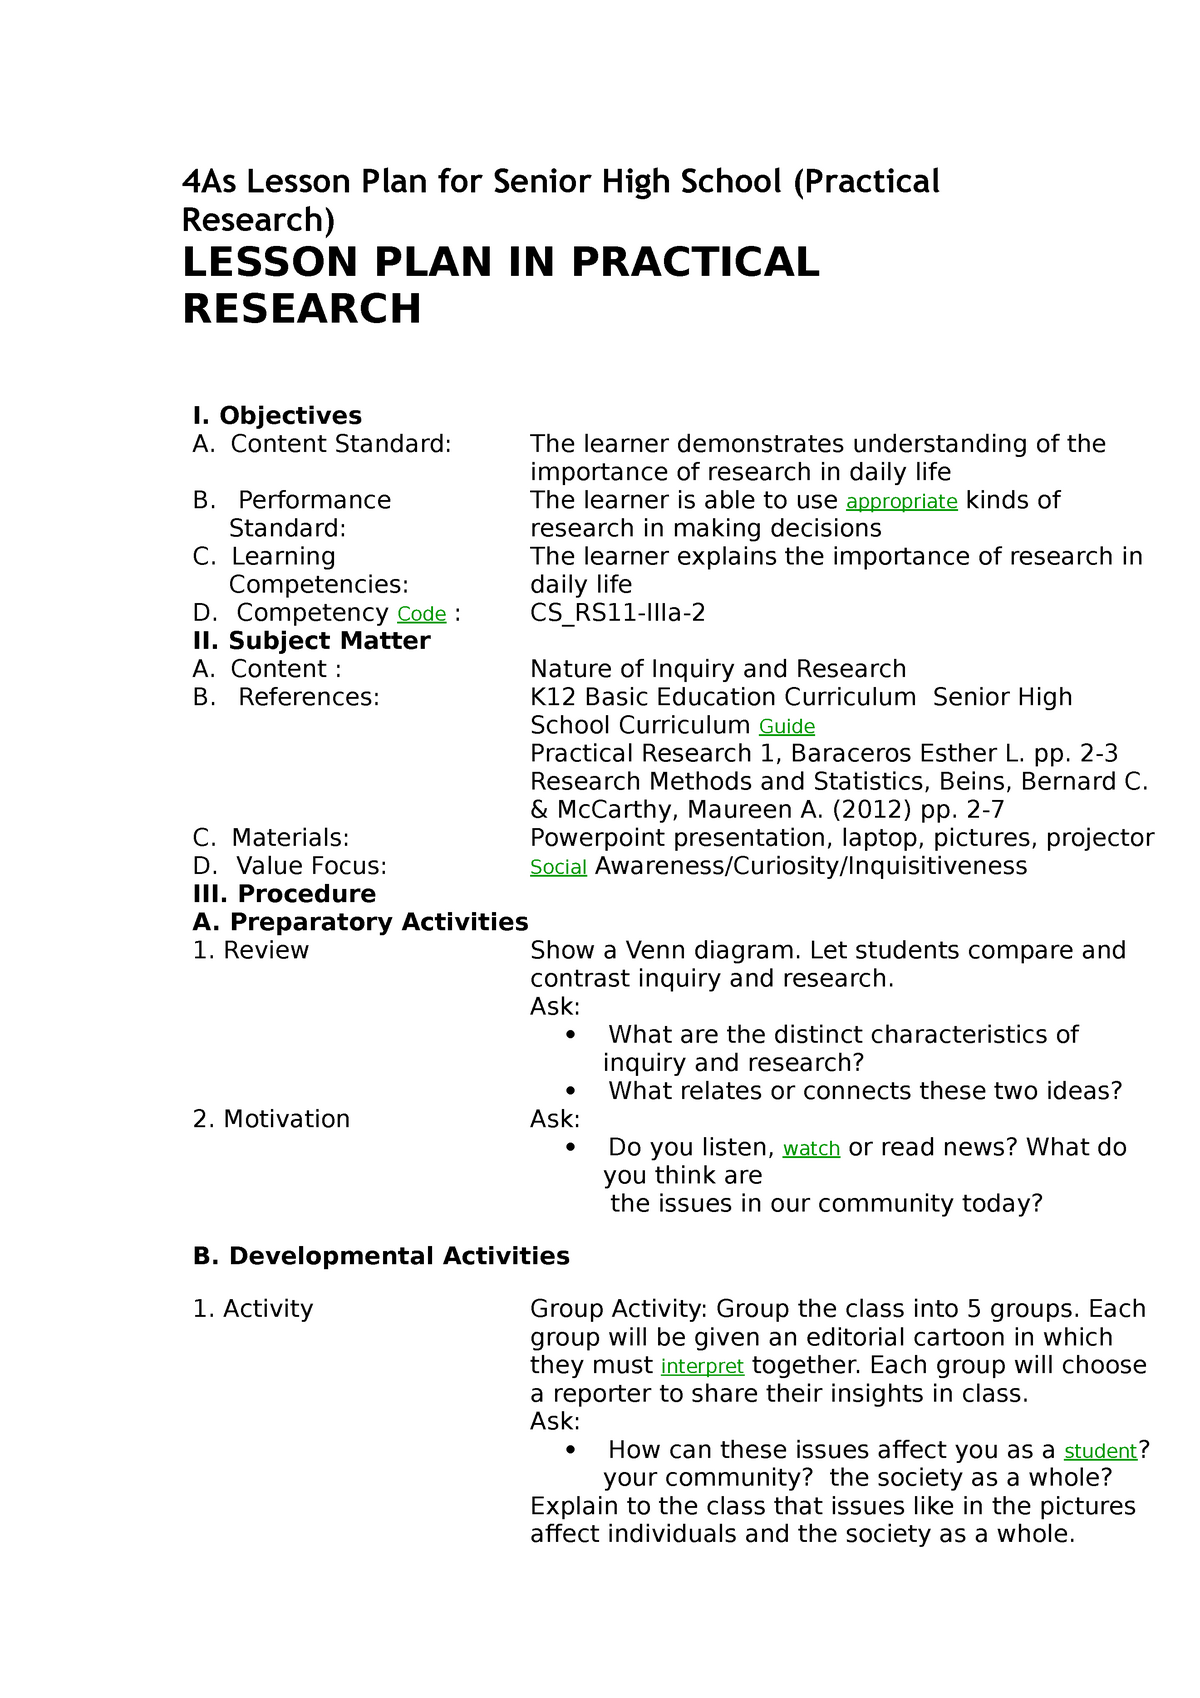 4as lesson plan in practical research 1